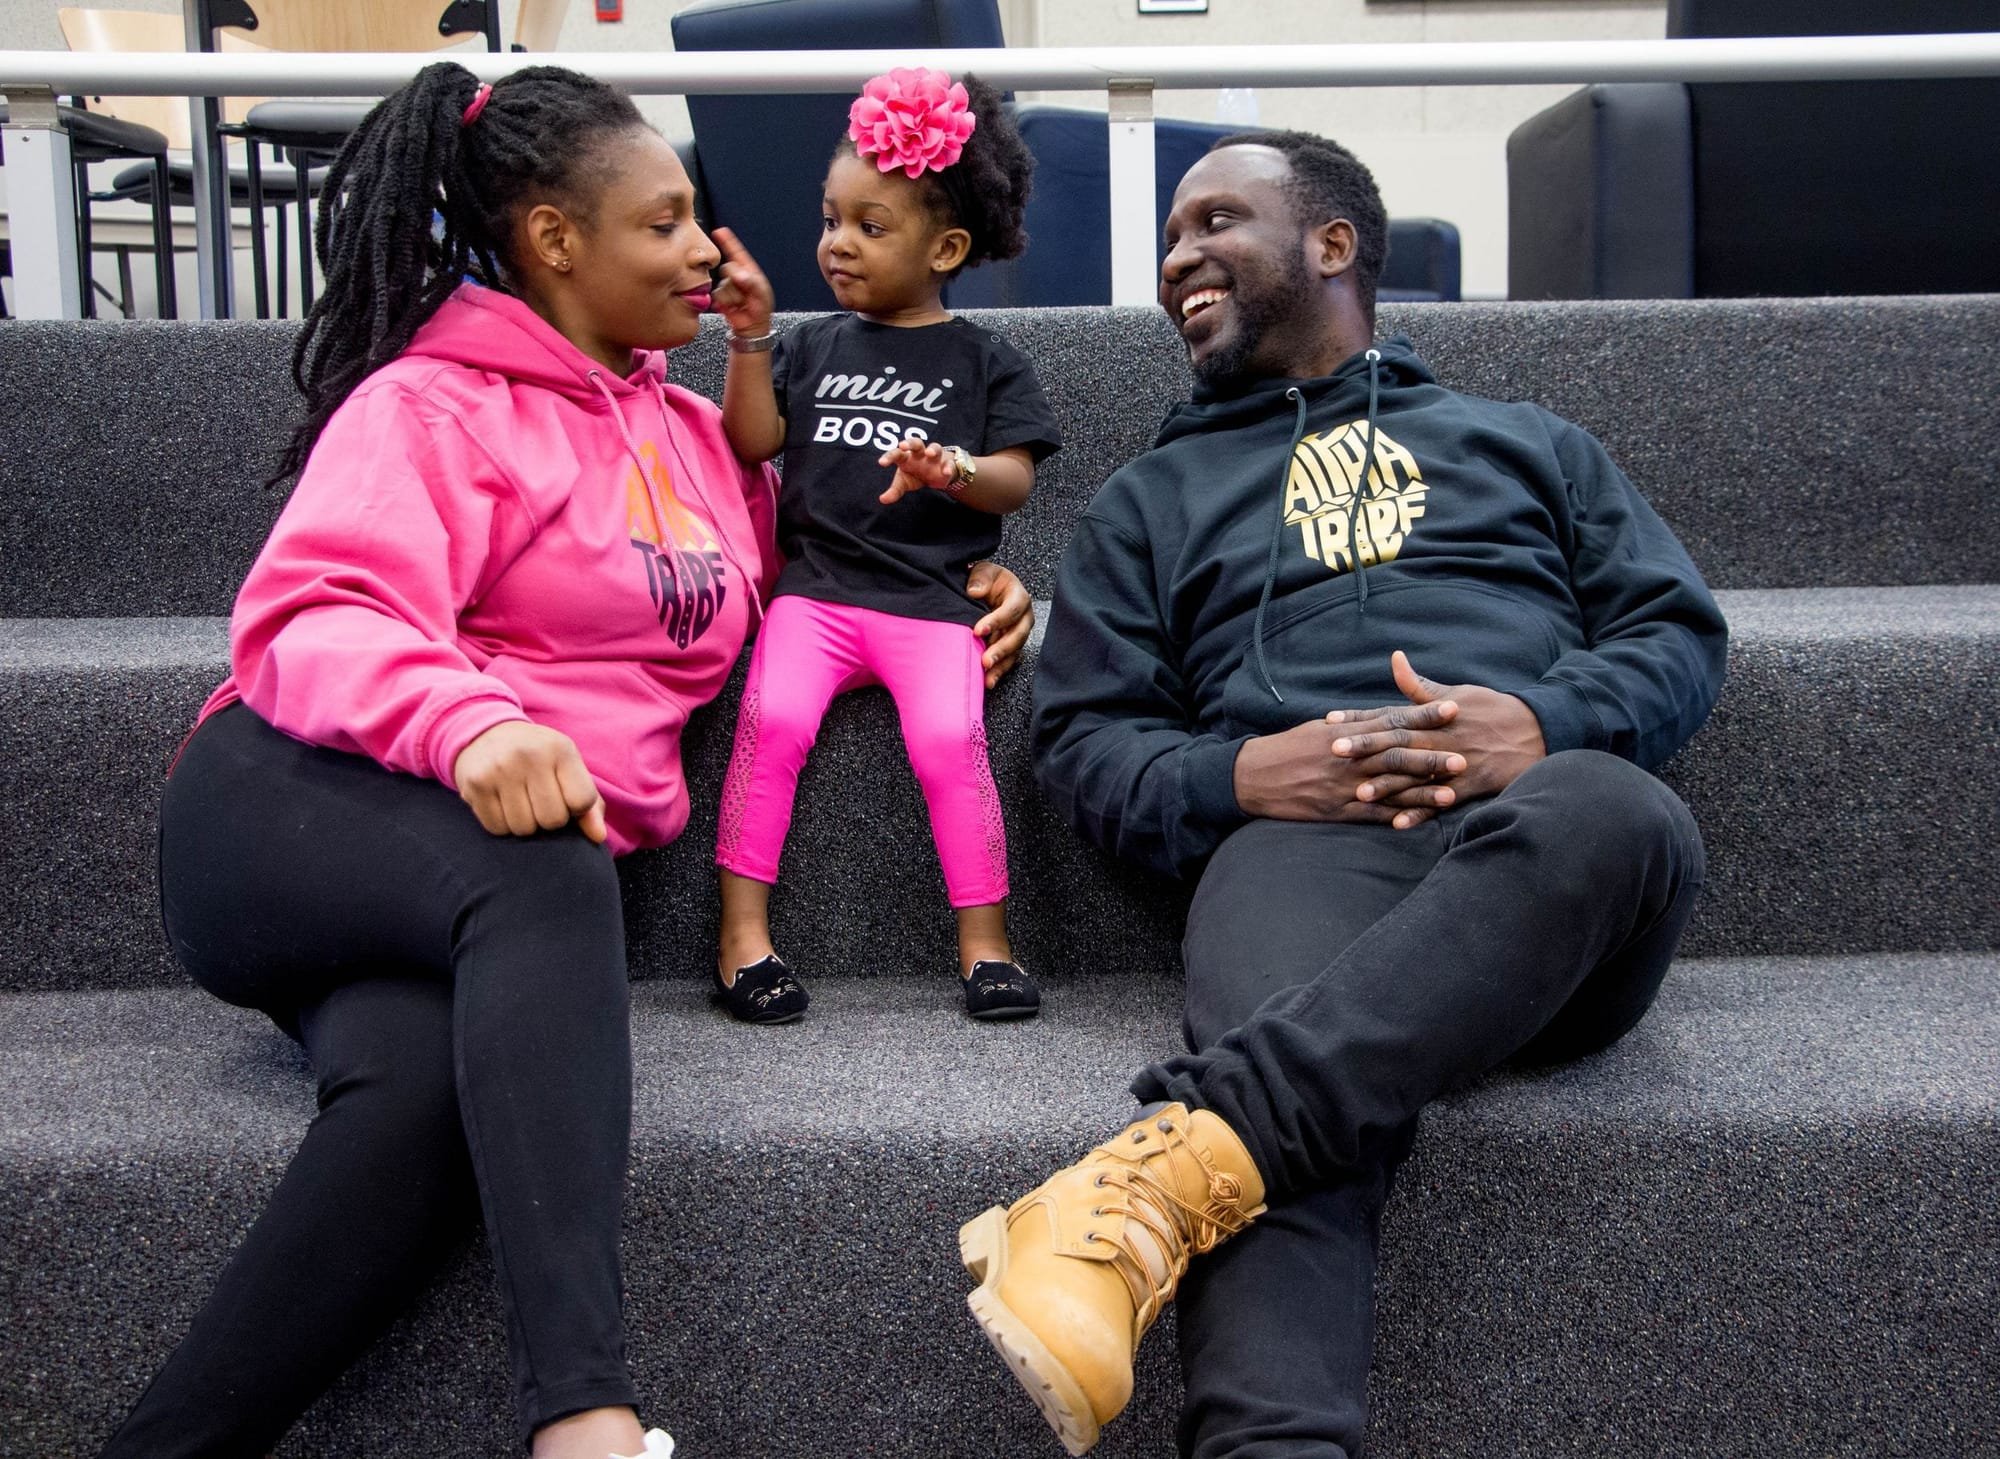 'Change Can Happen': Black Families On Racism, Hope And Parenting